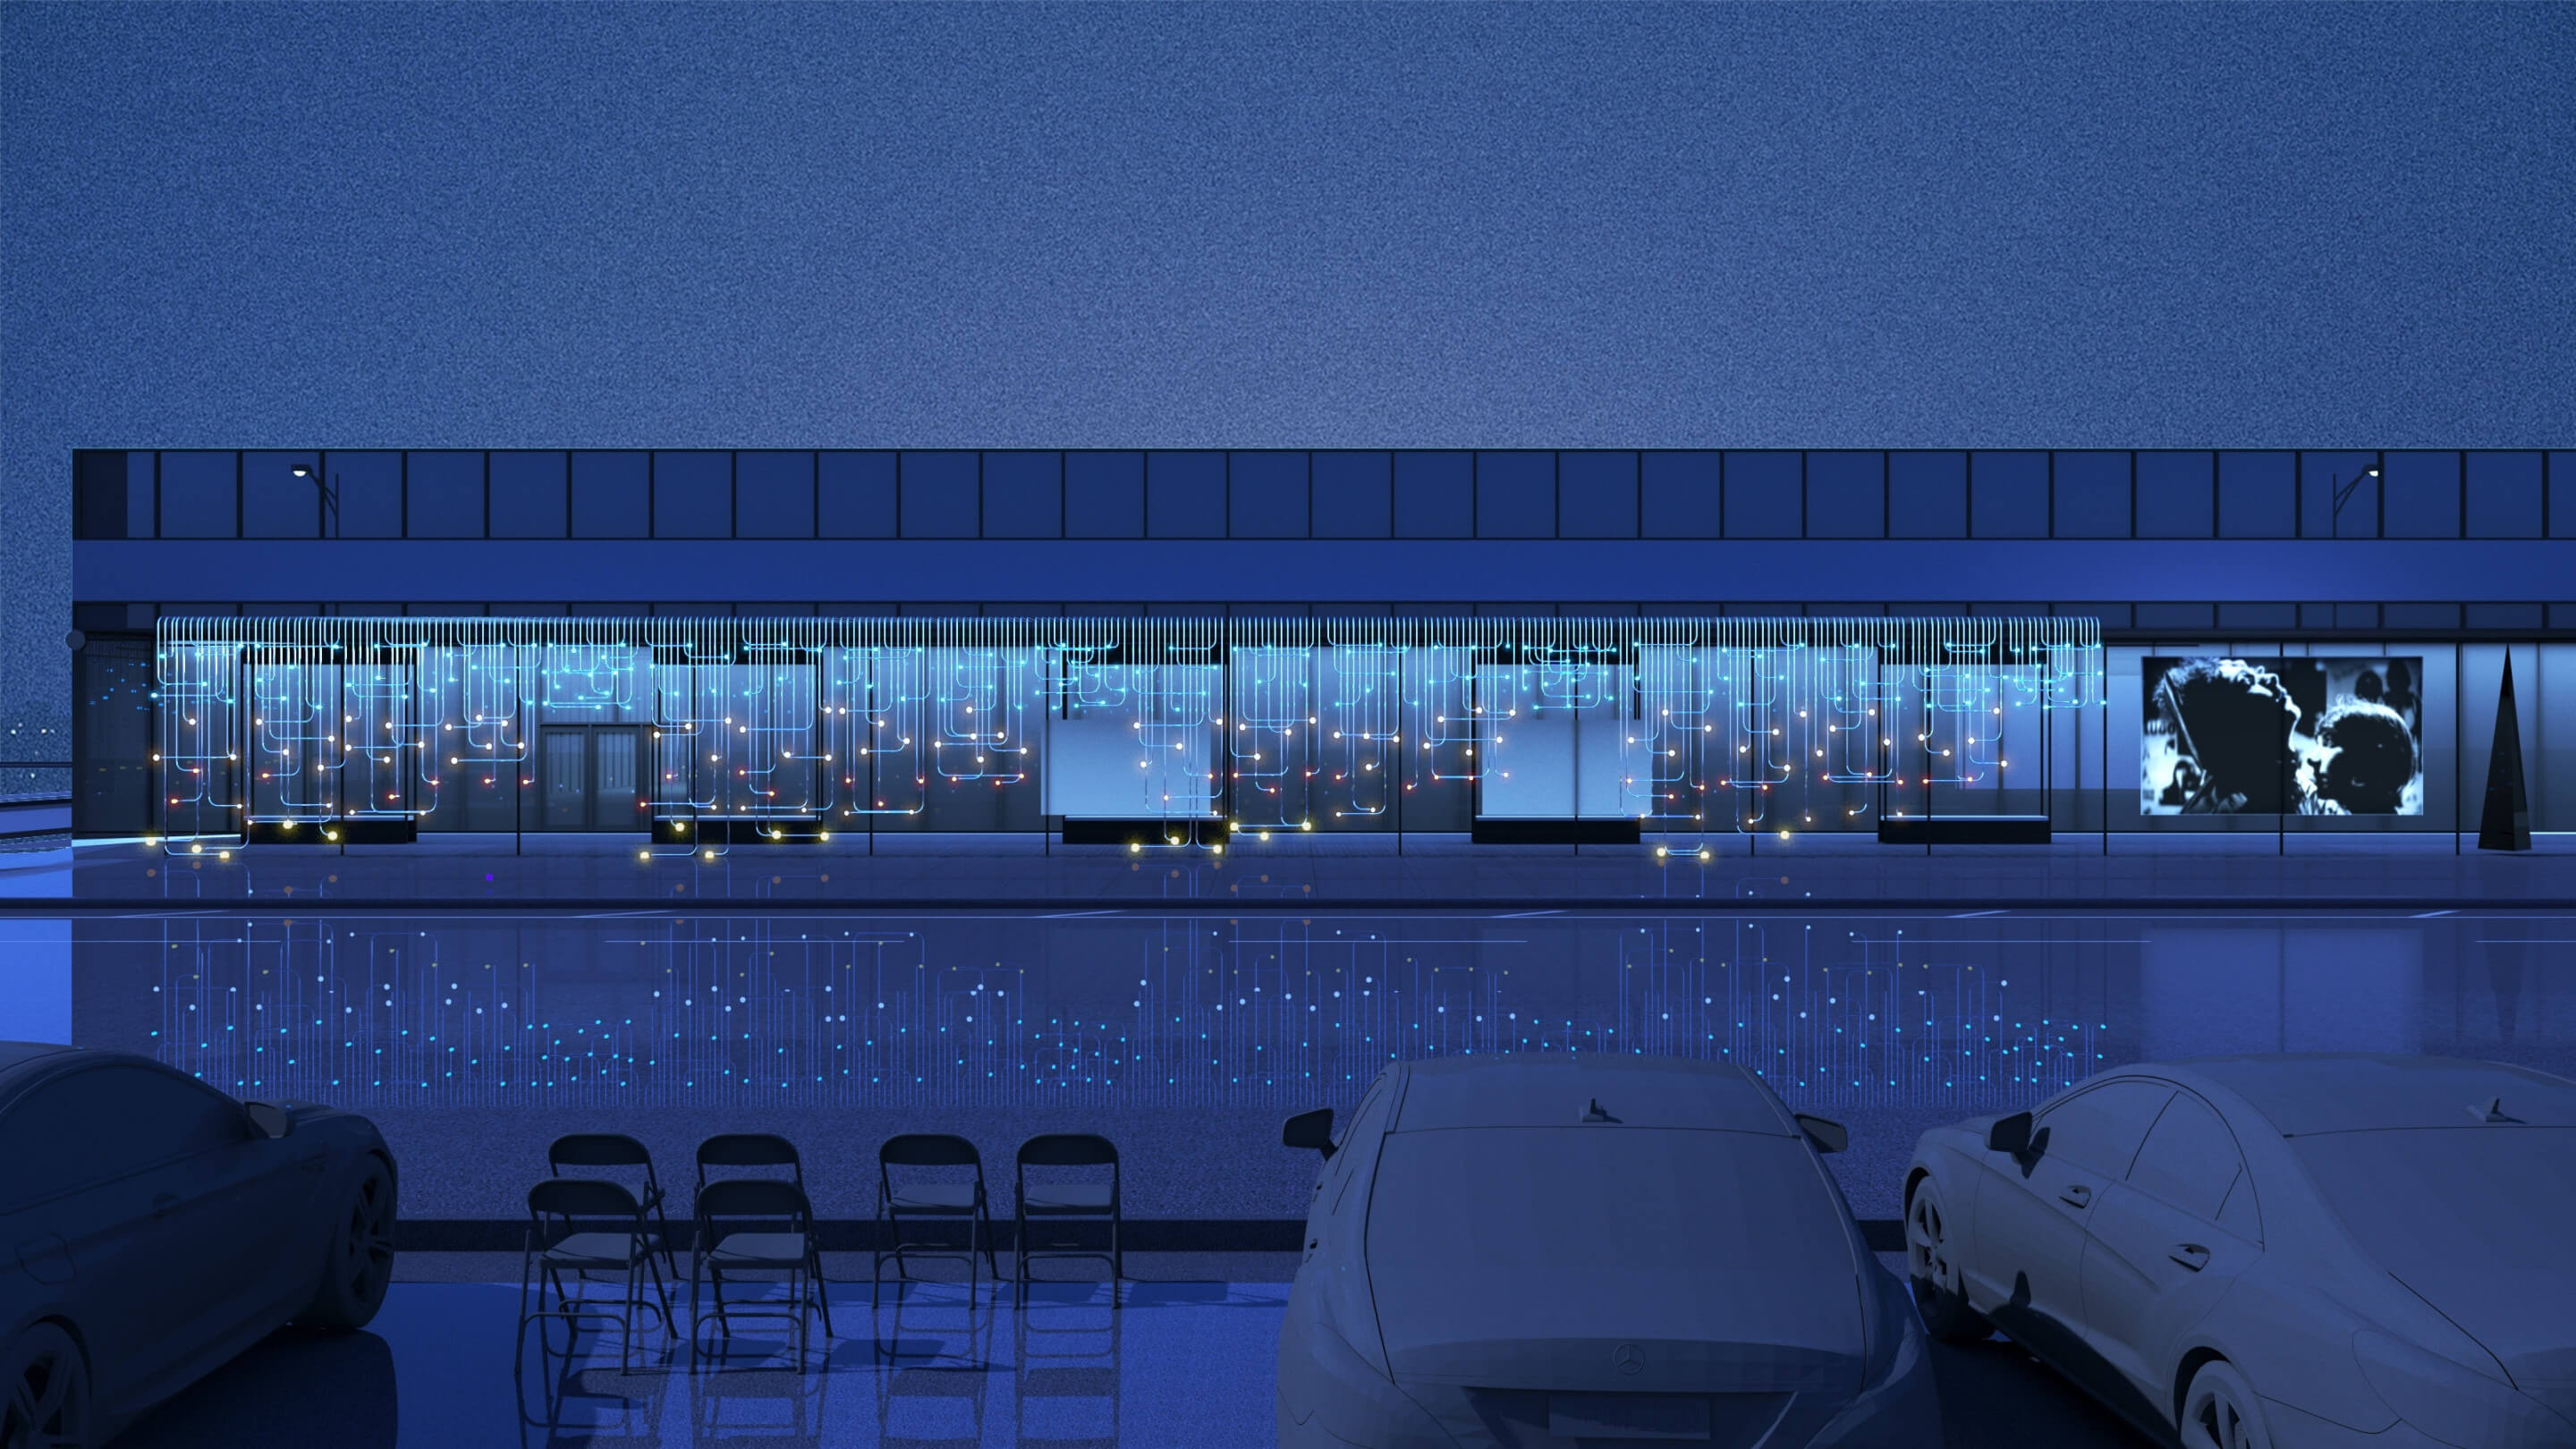 rendering of the interior of a cafe in blue lights